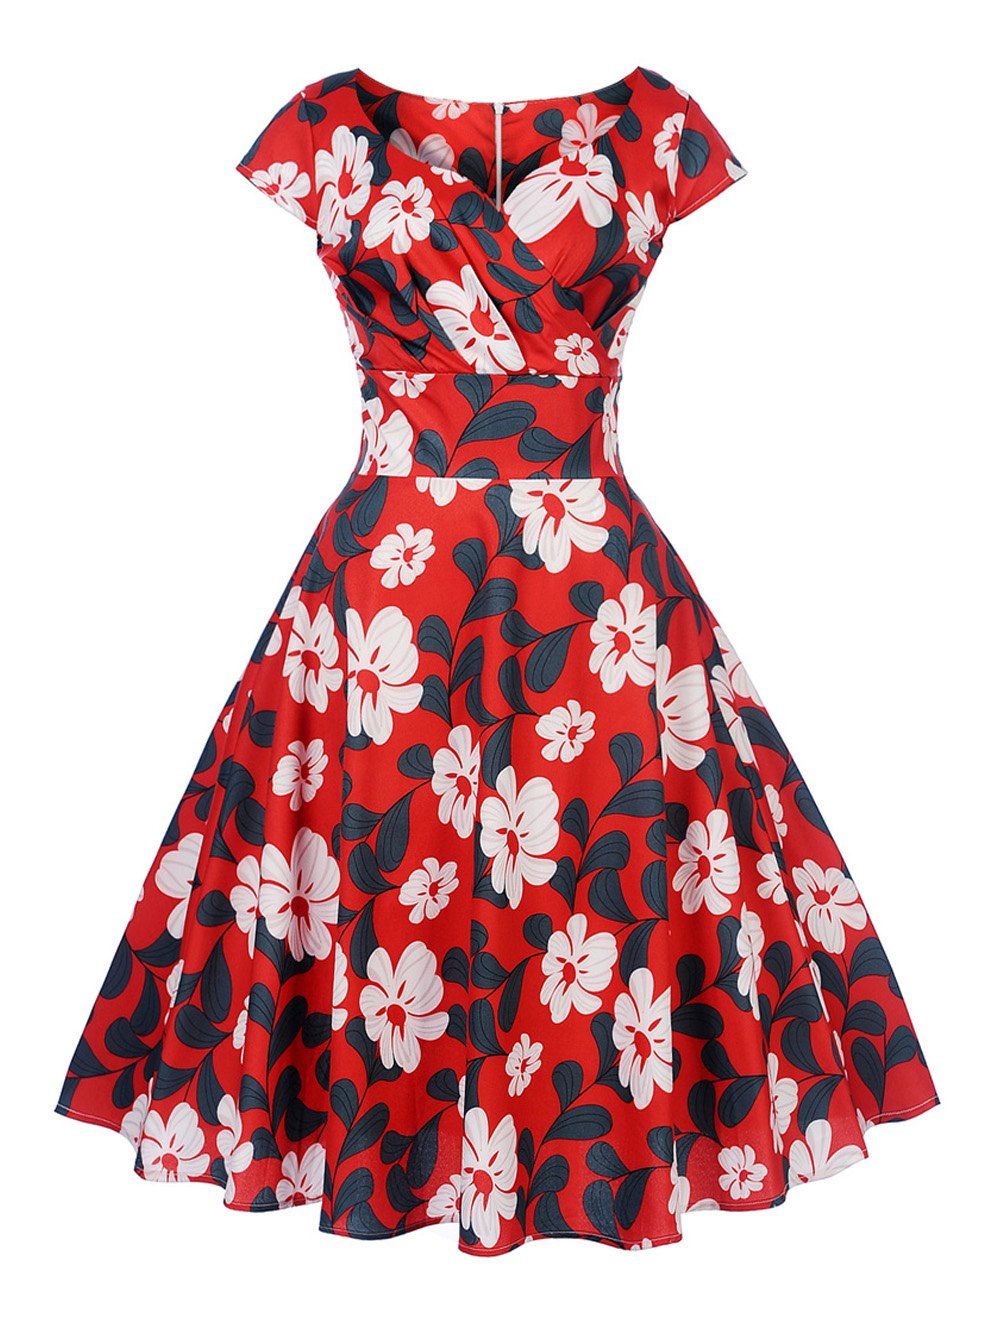 Women's Vintage 50s 60s retro Rockabilly Pinup Housewife Party Swing Dress